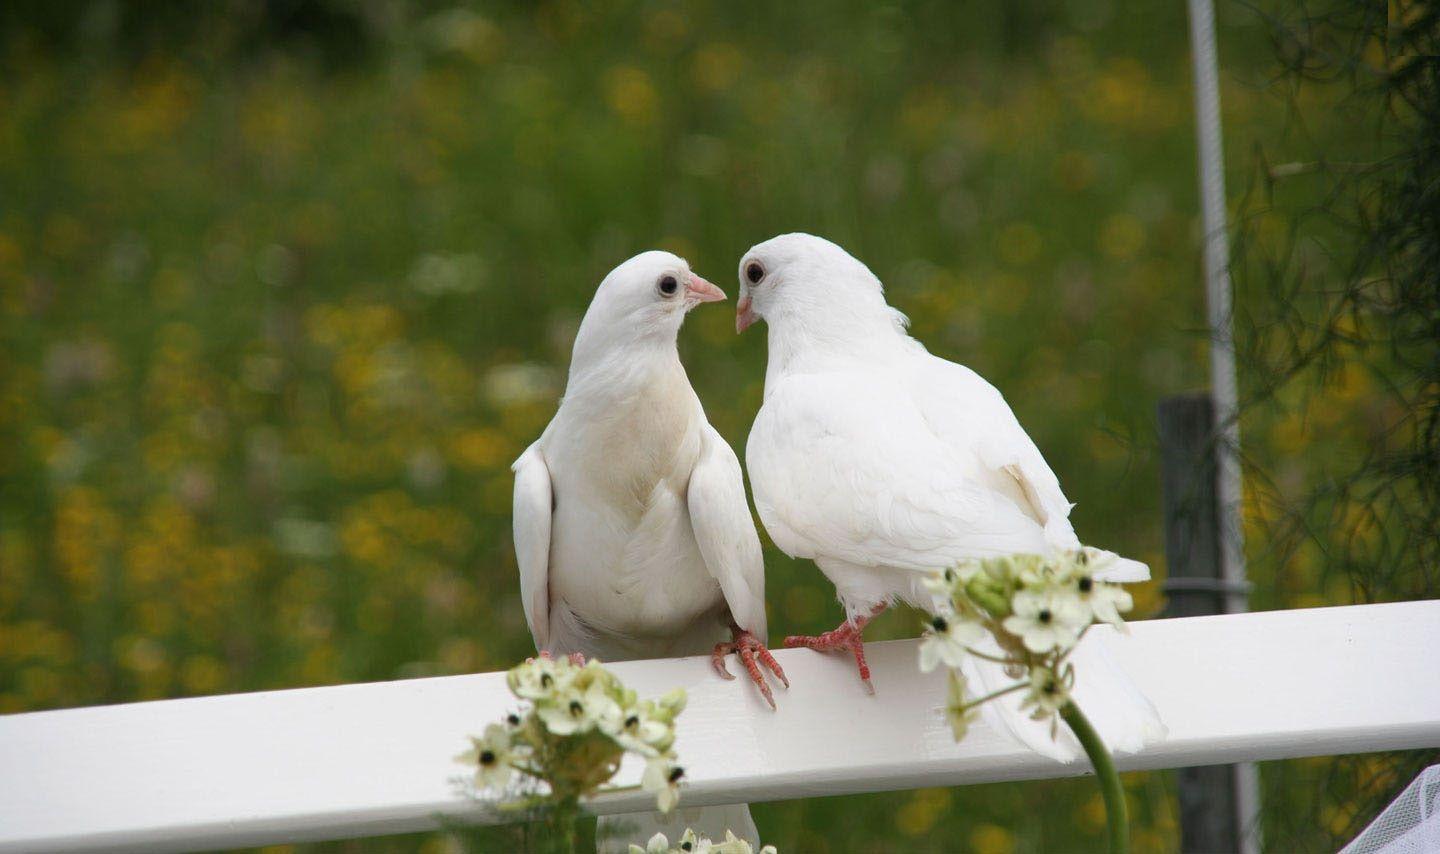 Cute White Pigeons Image New HD Picture Downloads